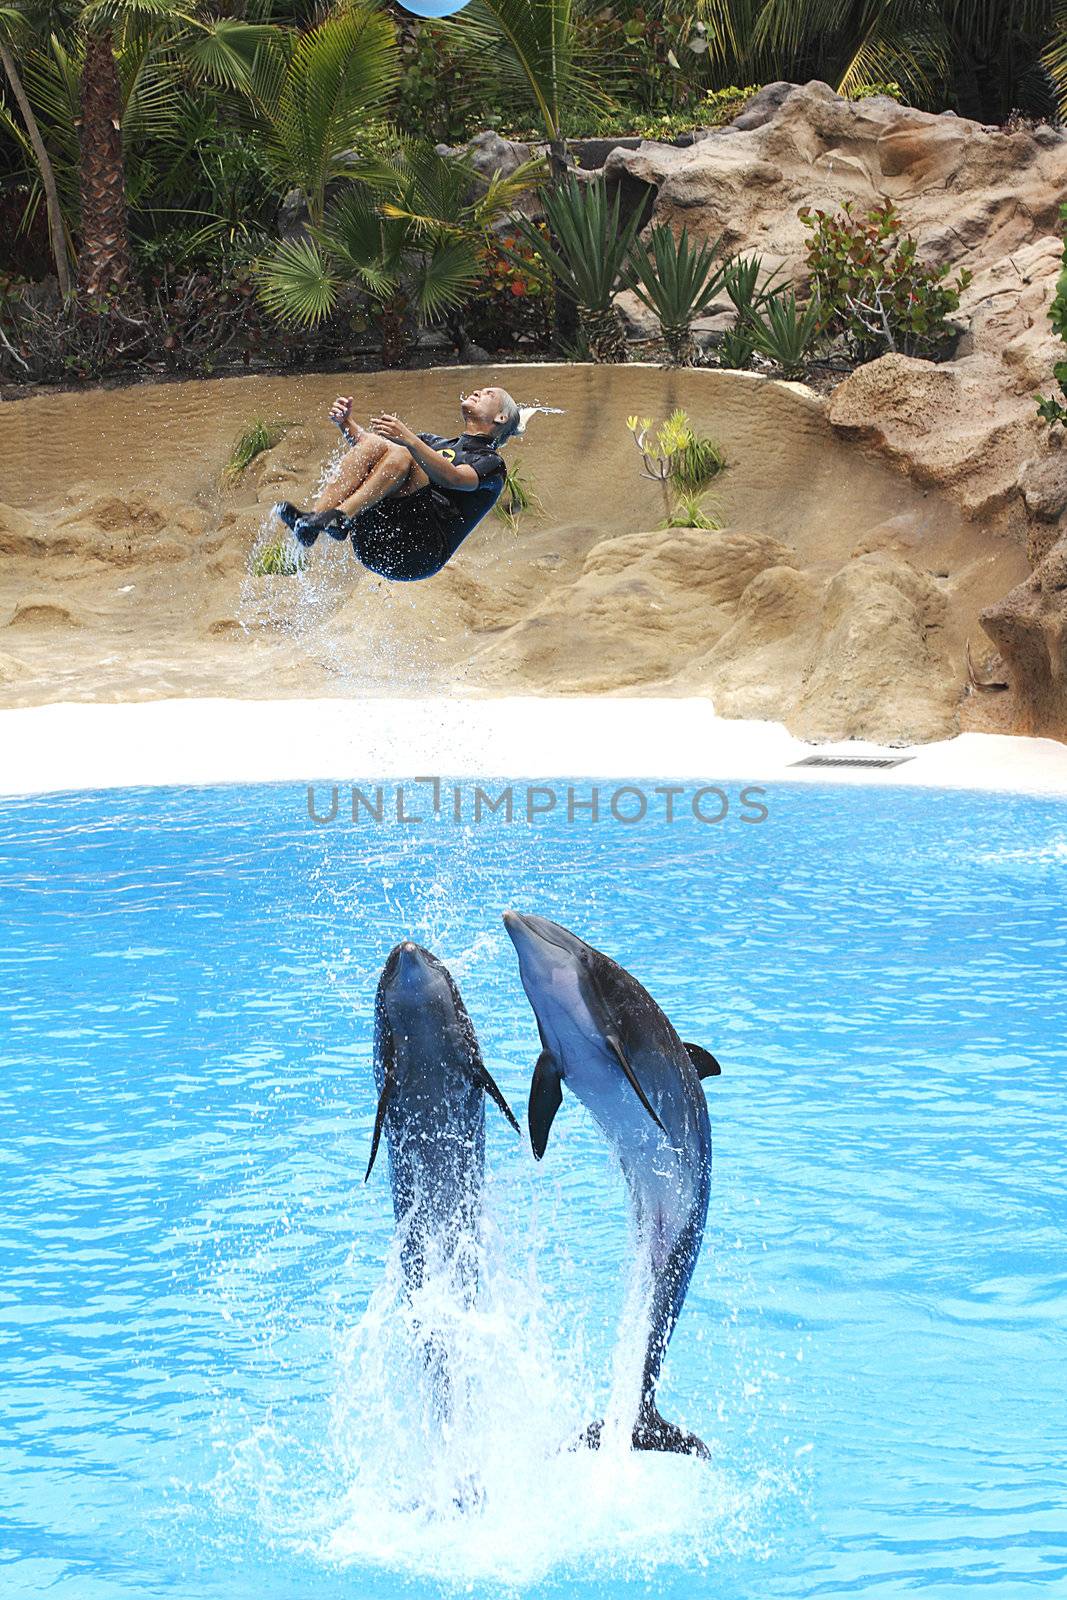 PUERTO DE LA CRUZ, TENERIFE - JULY 4: Dolphin show in the Loro Parque, which is now Tenerife's largest man made attraction with europe's biggest dolphin pool. July 4 2012 Puerto De La Cruz, Tenerife